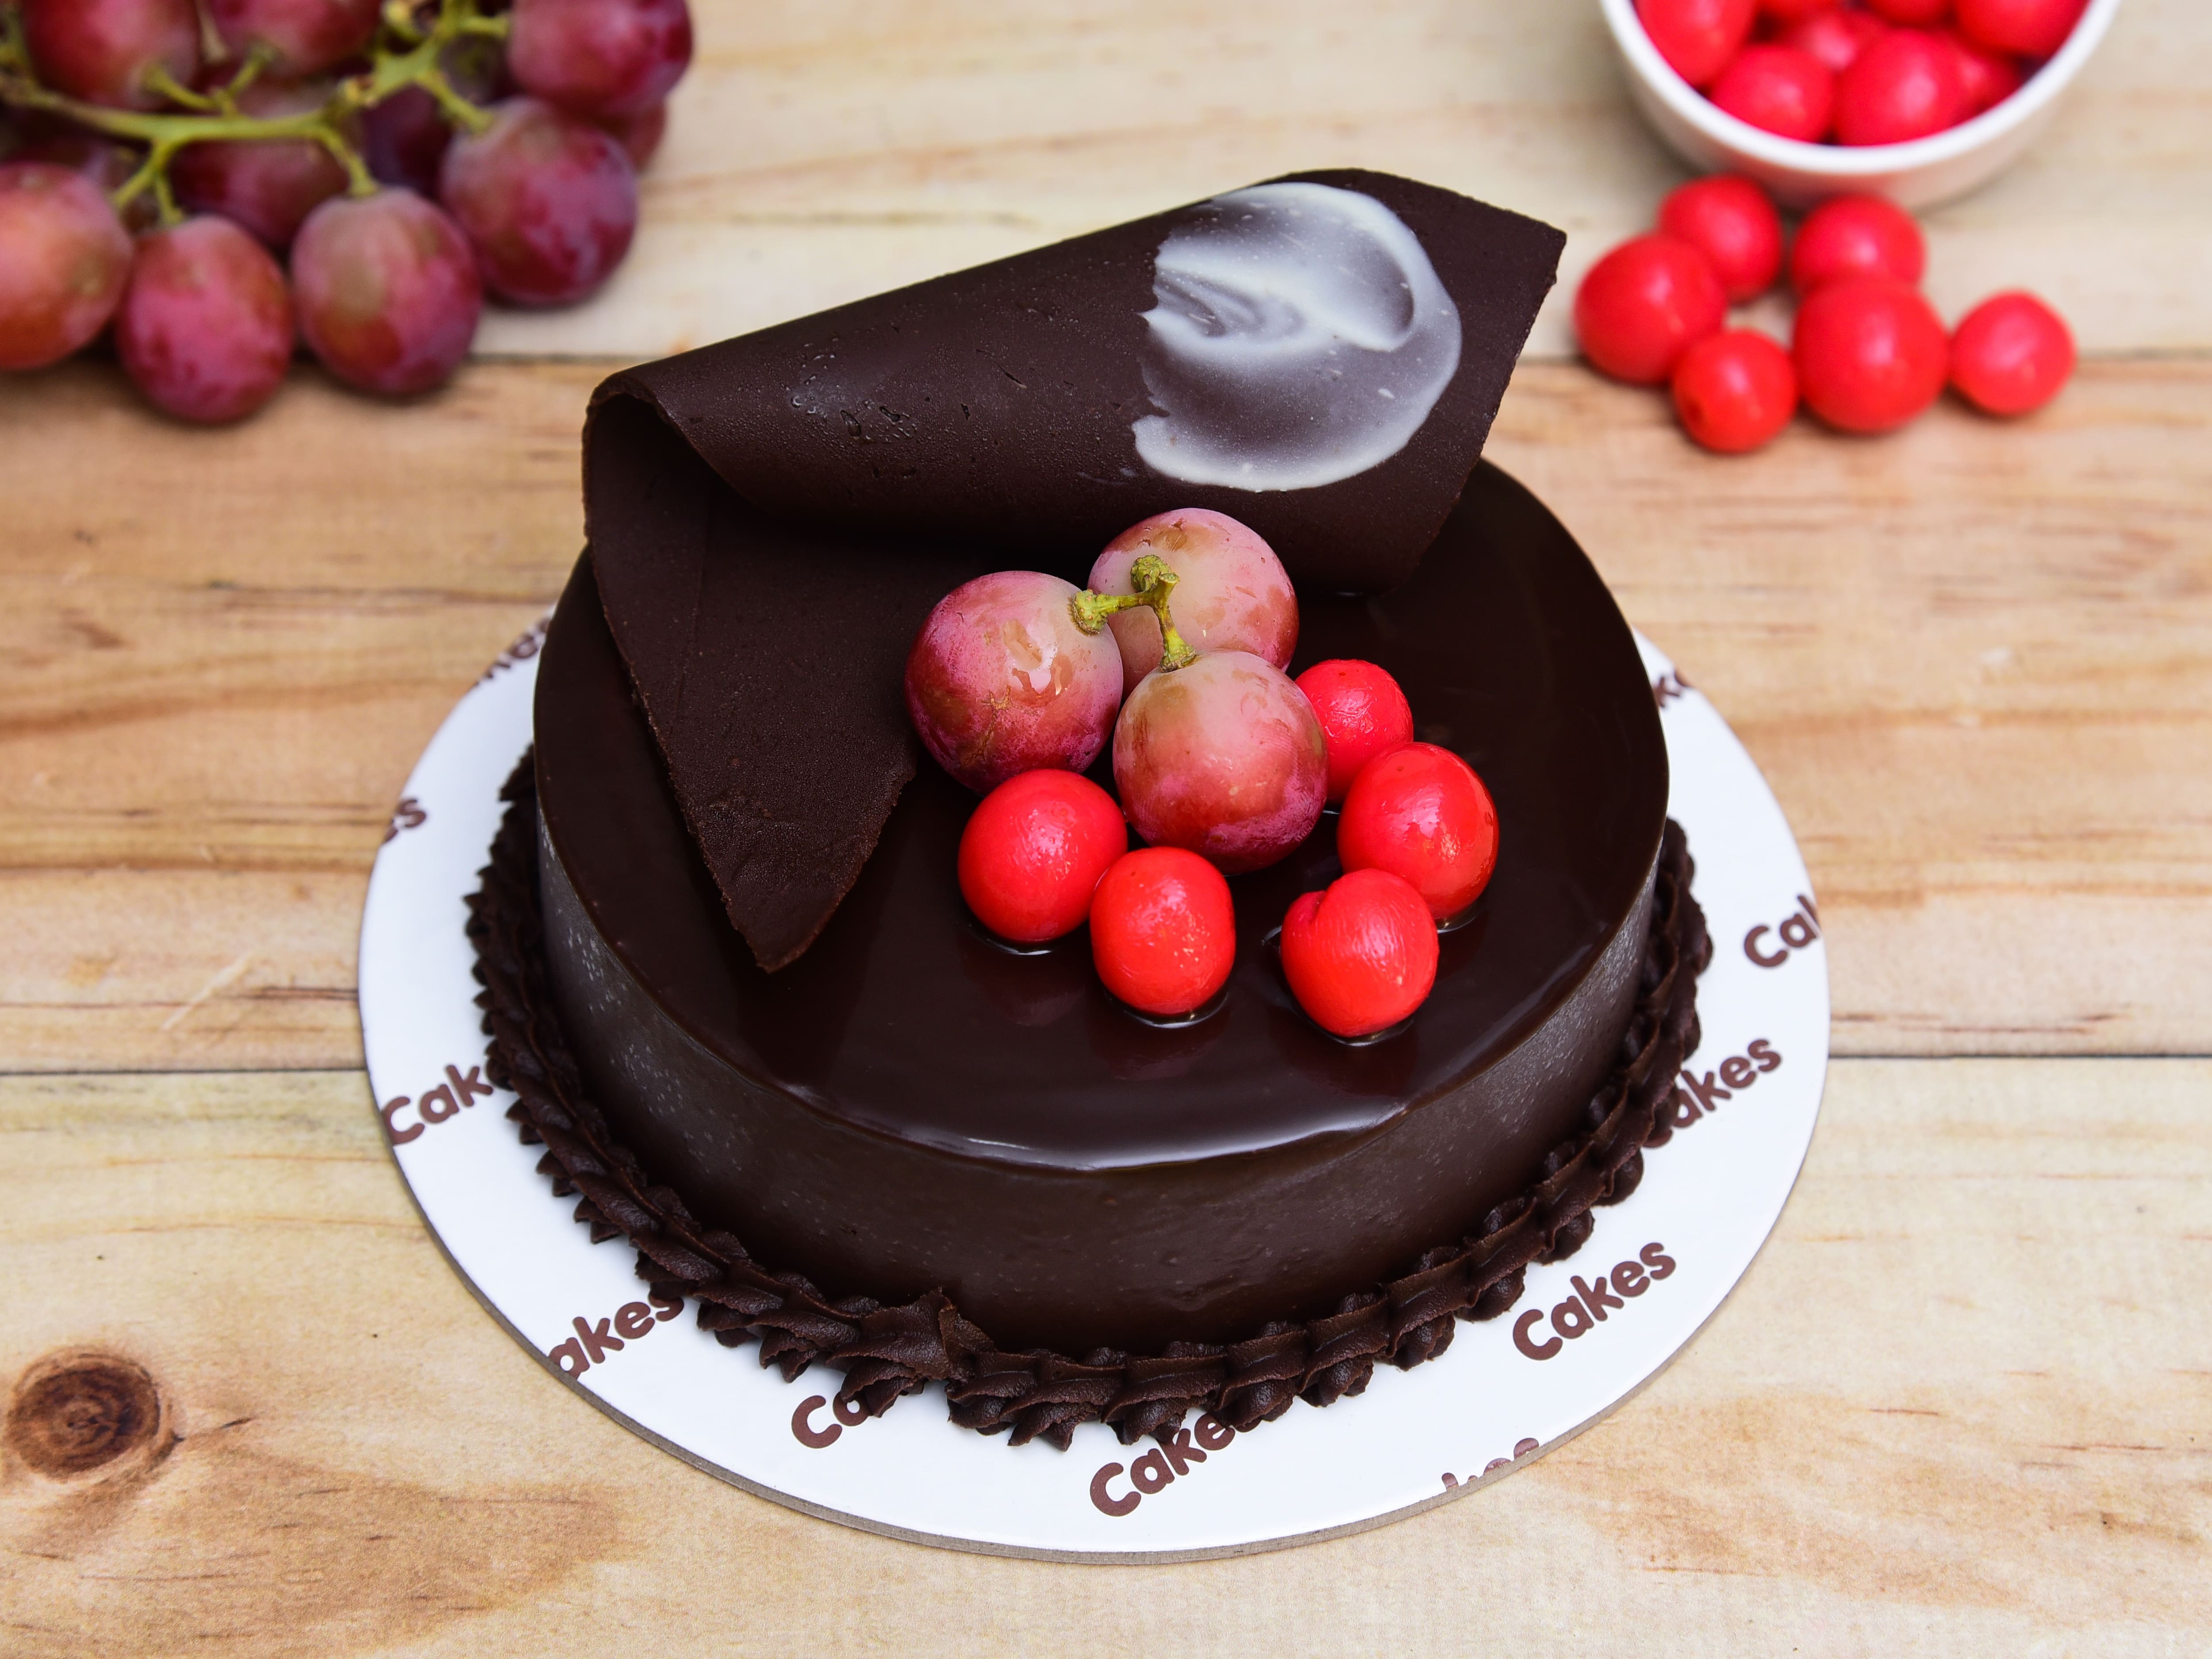 135 OFF ABOVE ₹299 Crazy 4 Cakes 4.2 Bakery, Desserts, Snacks New Alipore